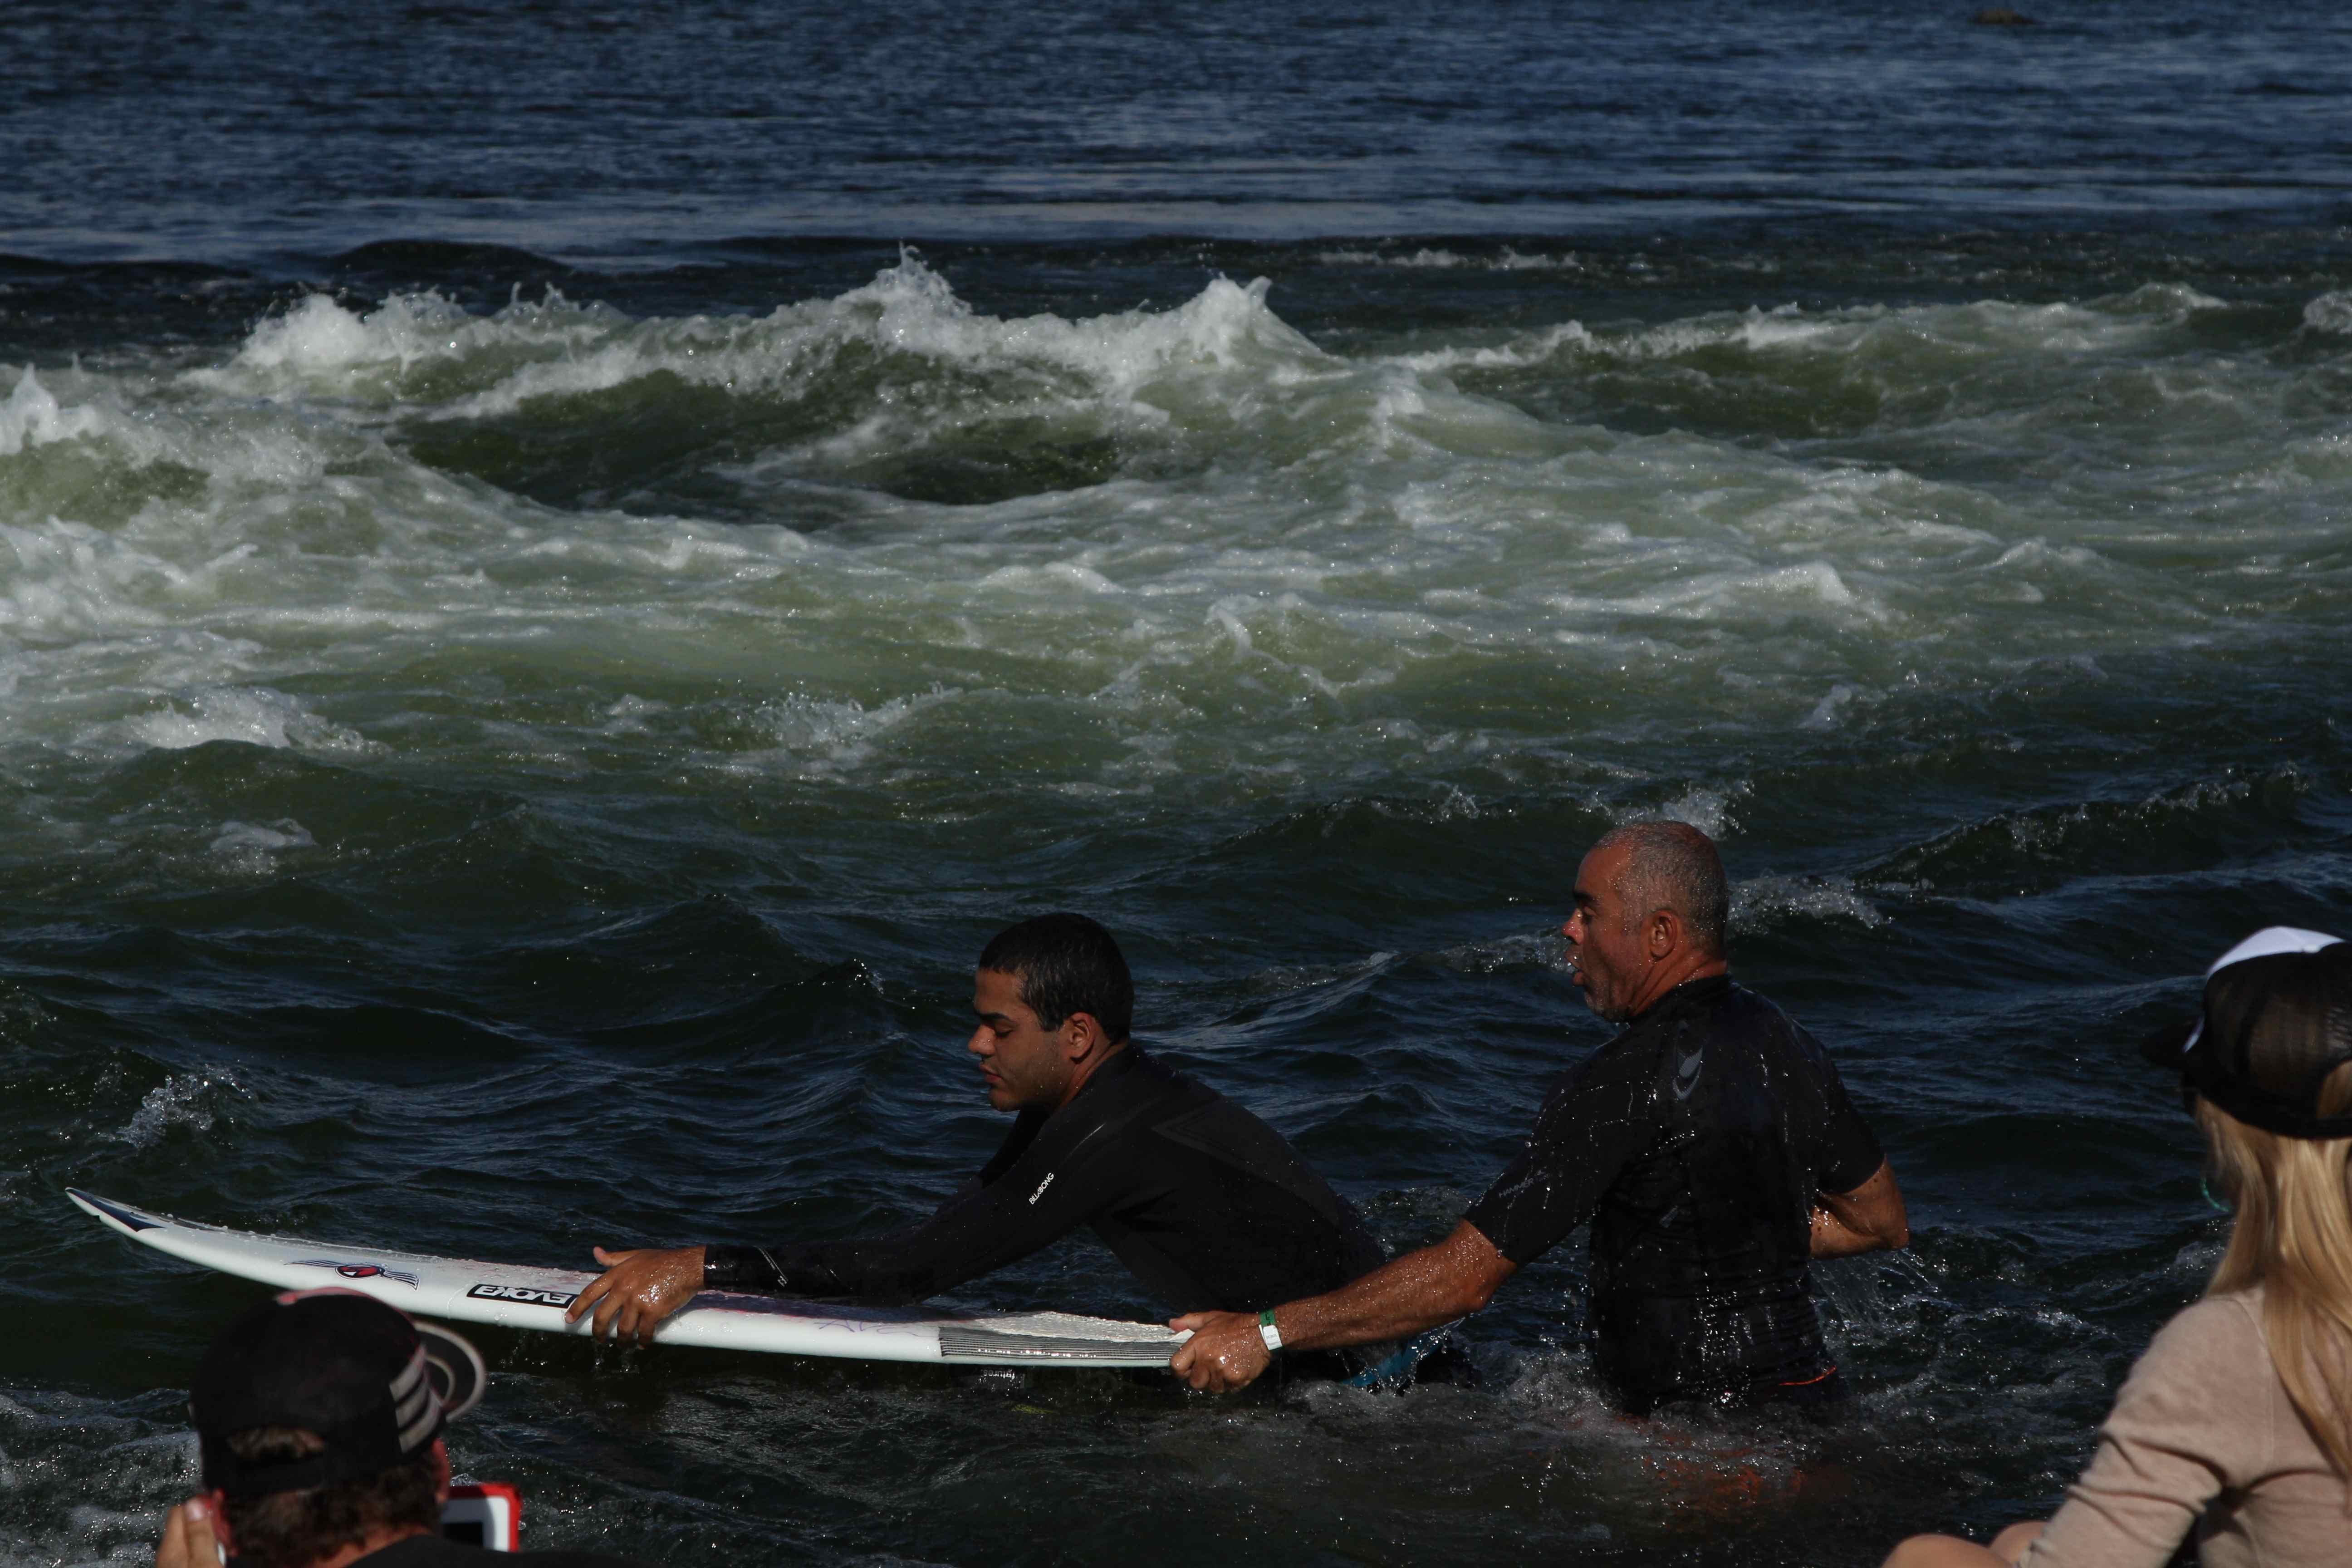 Derek prepares to surf with the help of his dad as KWP founder Kristina Pickard watches on